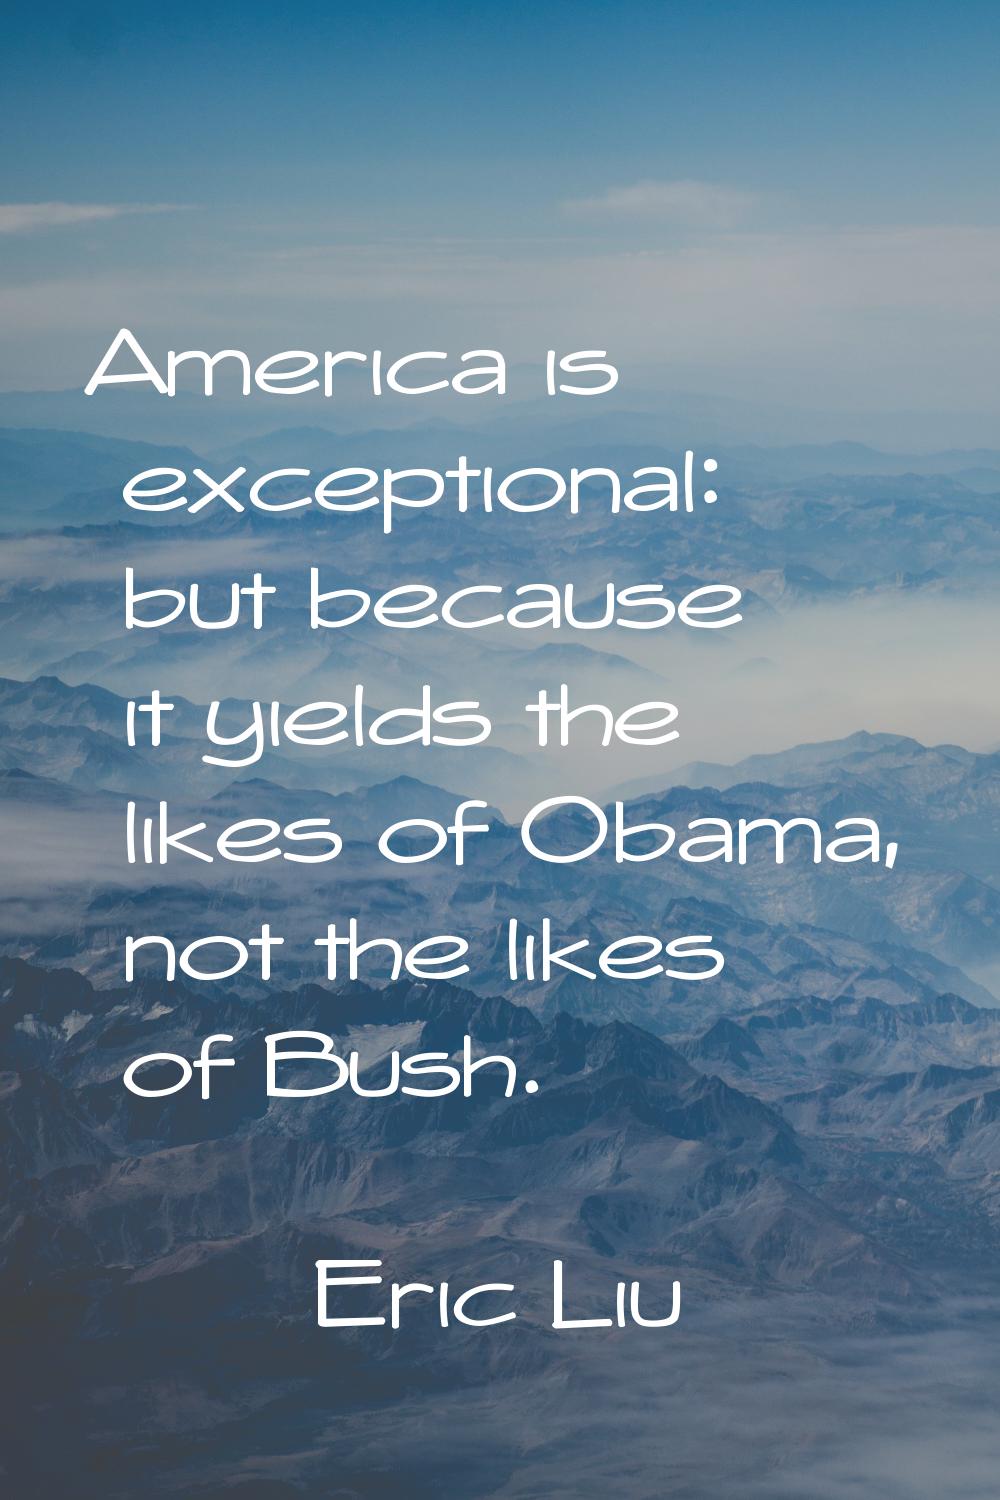 America is exceptional: but because it yields the likes of Obama, not the likes of Bush.